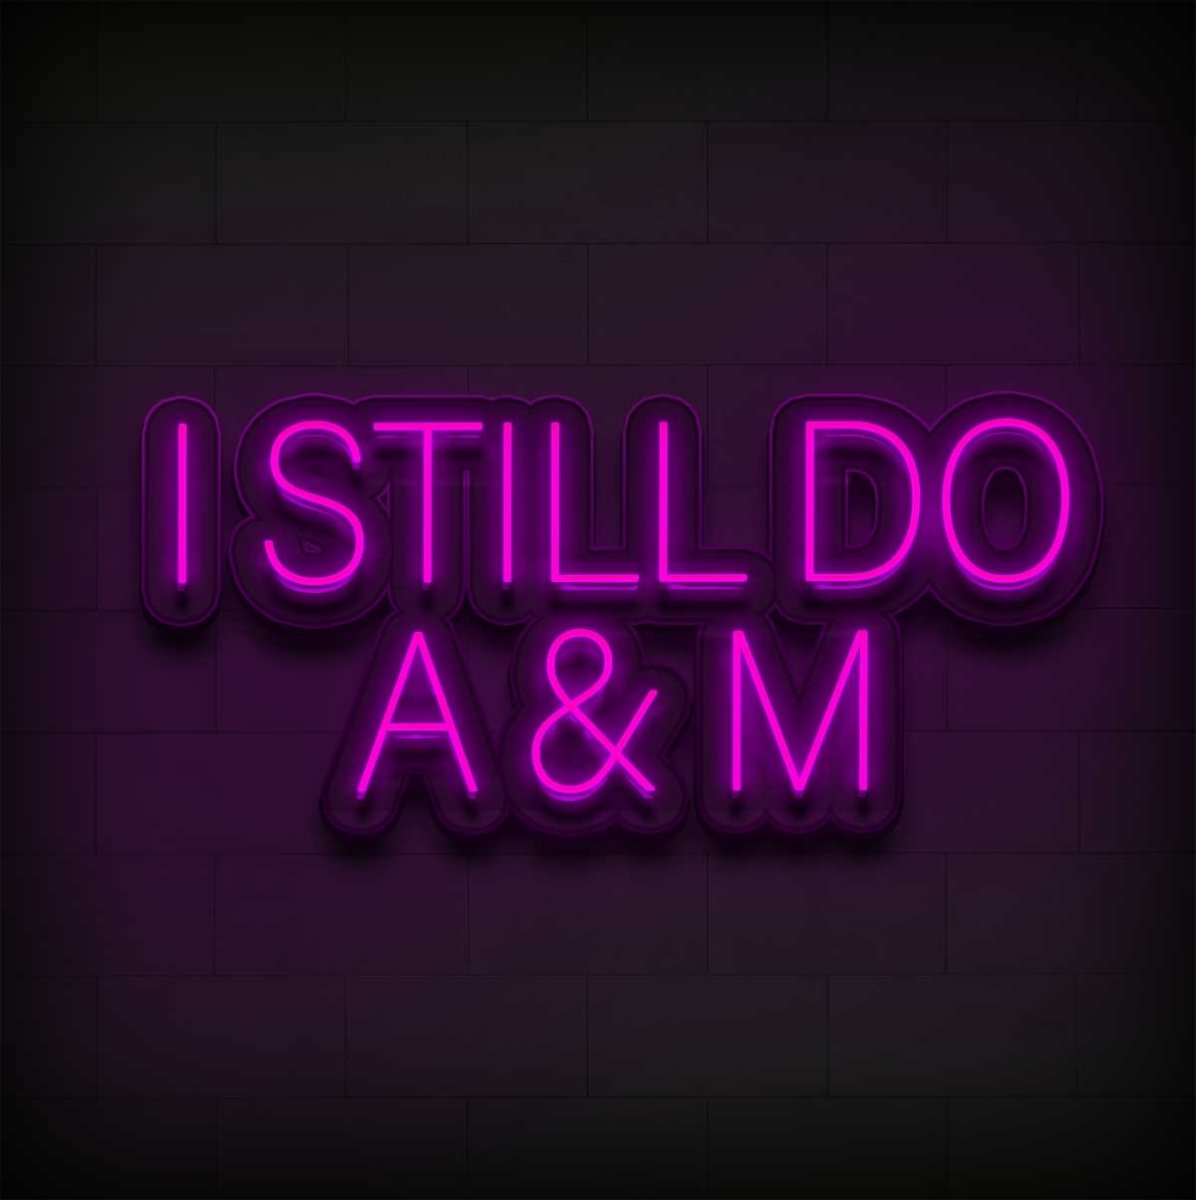 I Still Do - Custom Neon Sign With Initials - NeonXpert